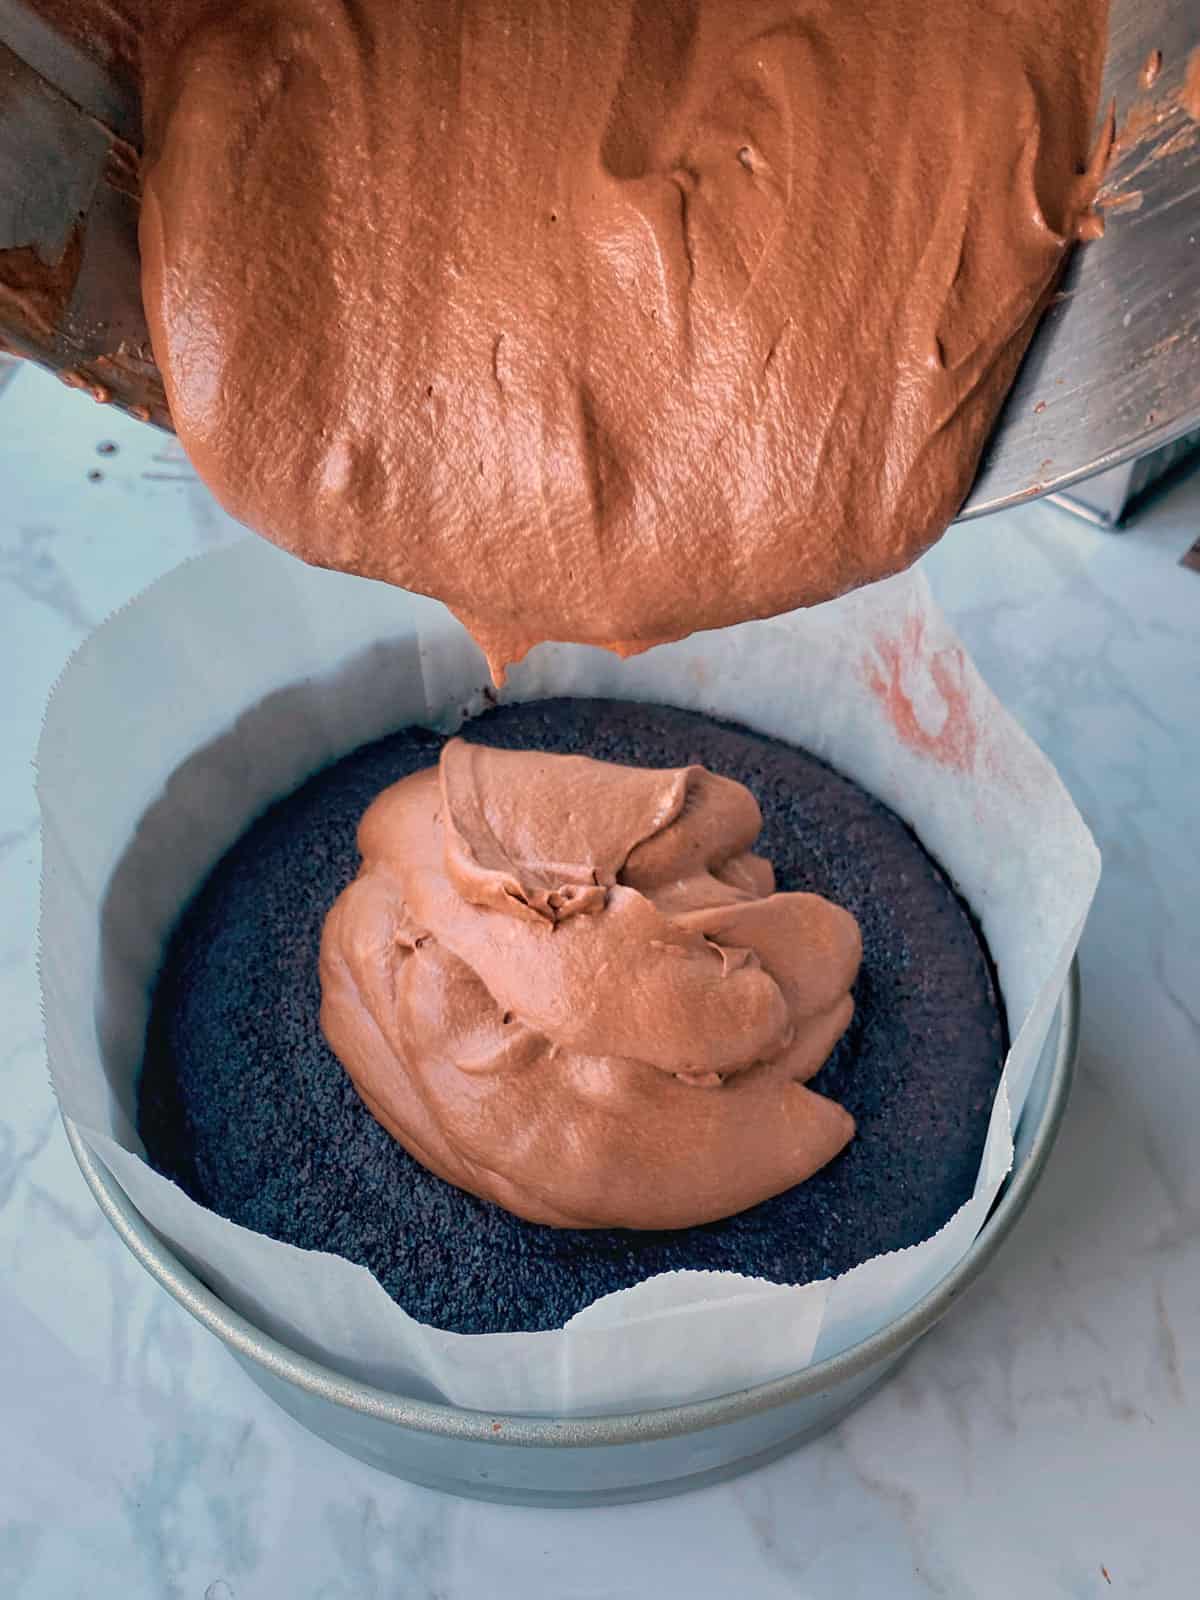 Chocolate mousse being poured onto a chocolate cake in a tin.